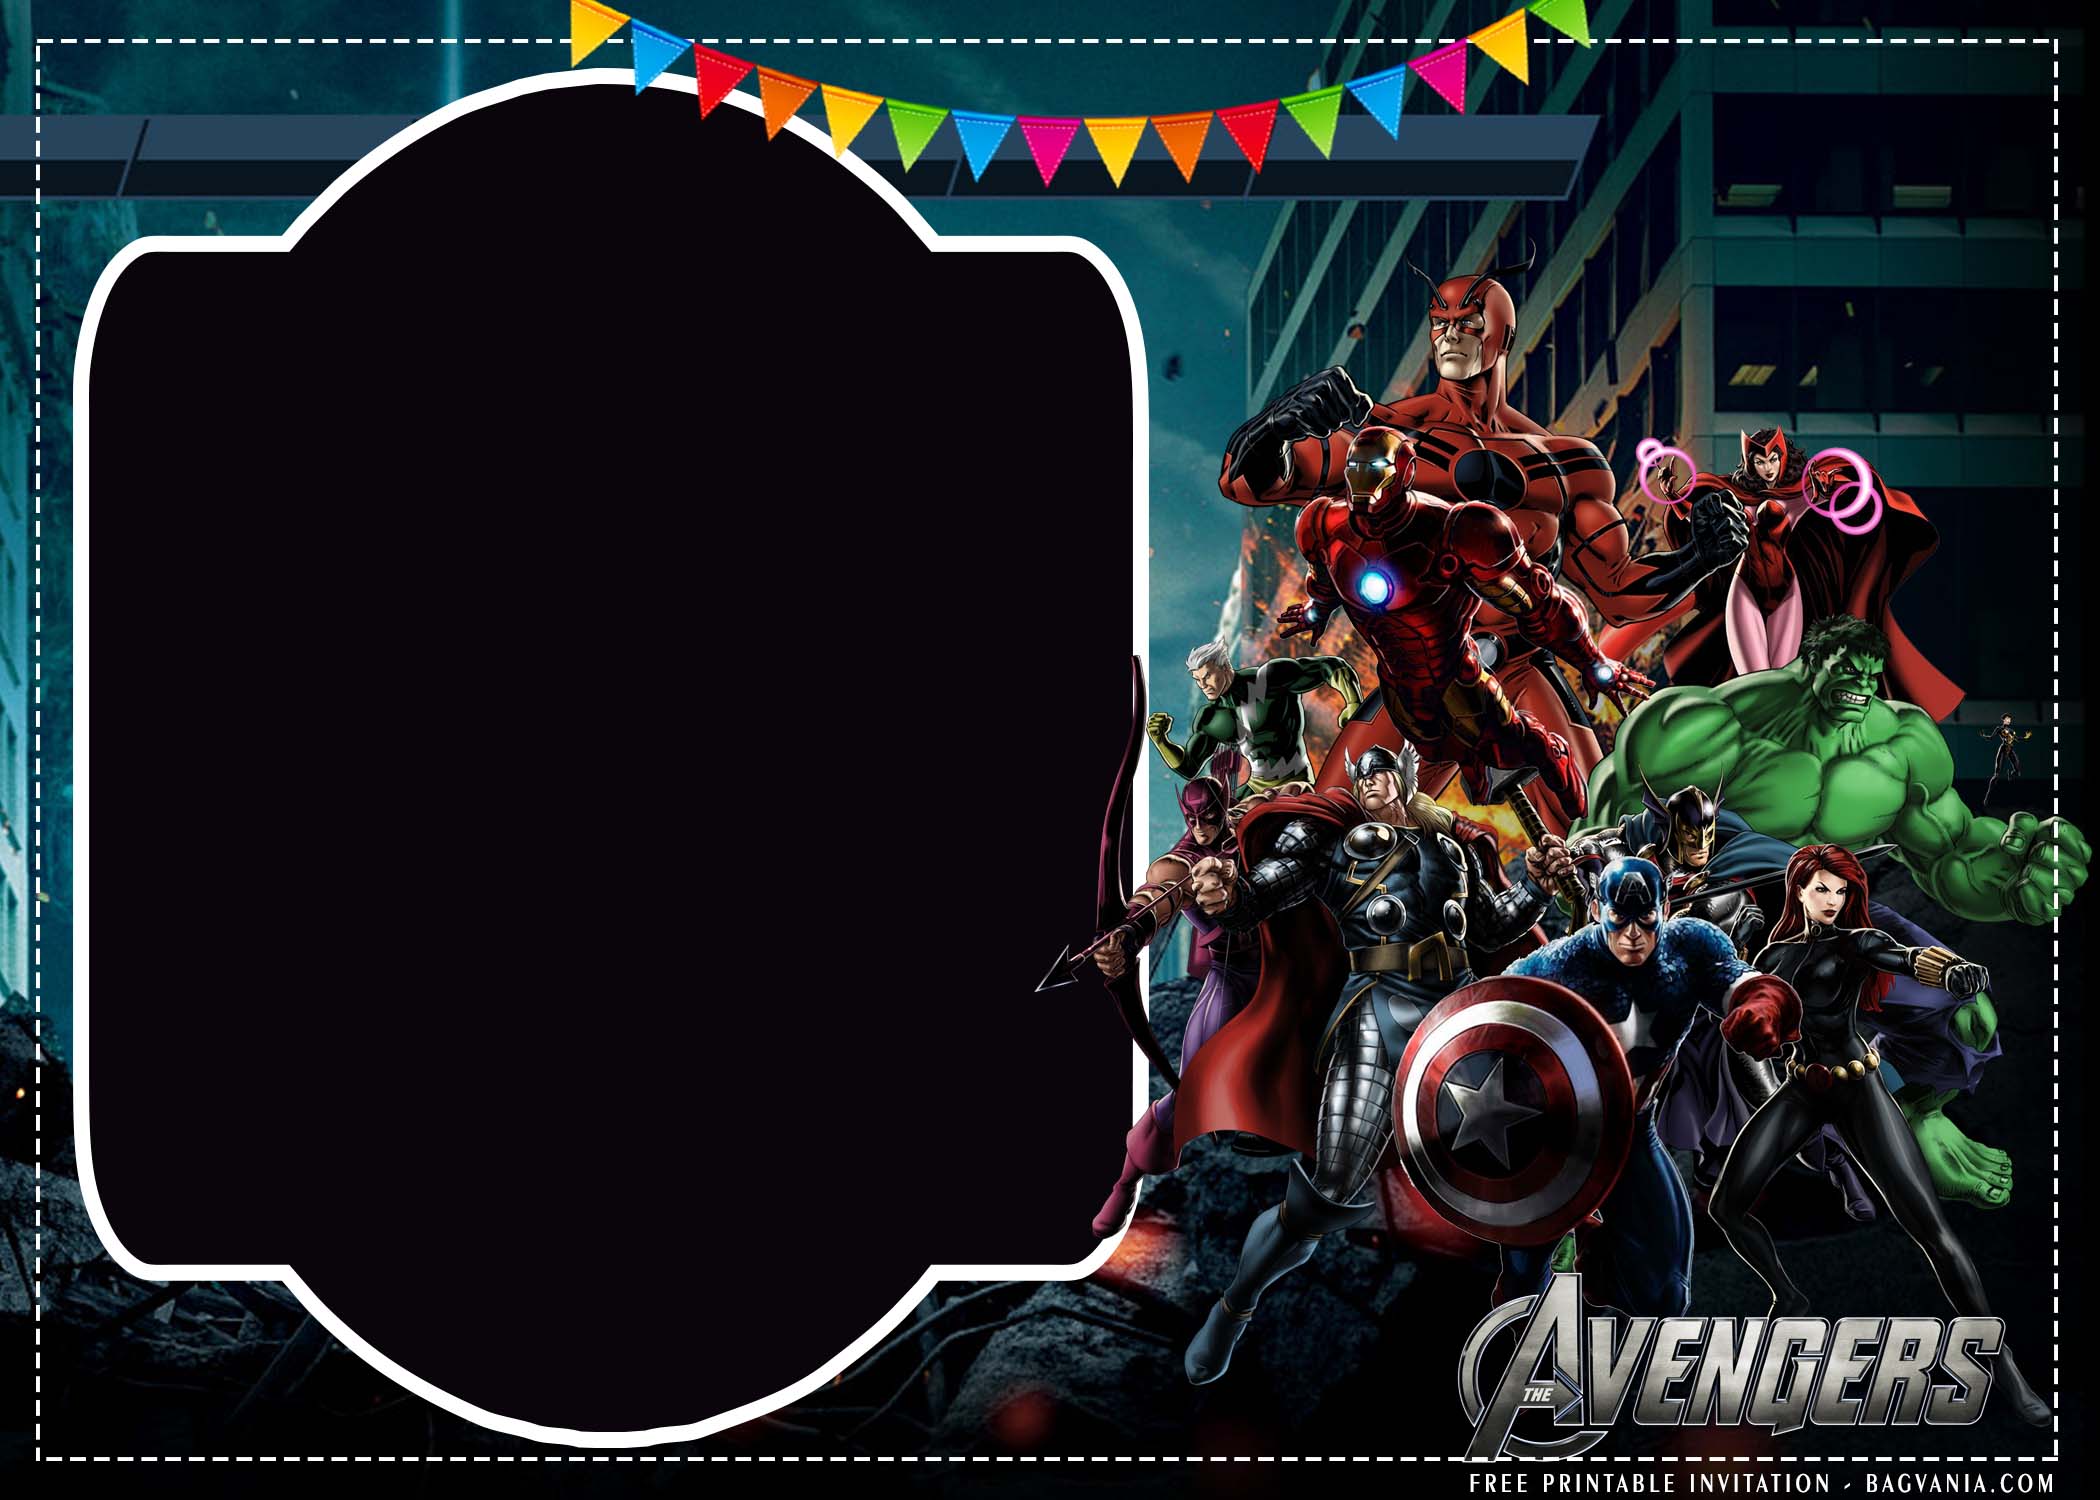 Avengers Invitations Template Free from www.bagvania.com